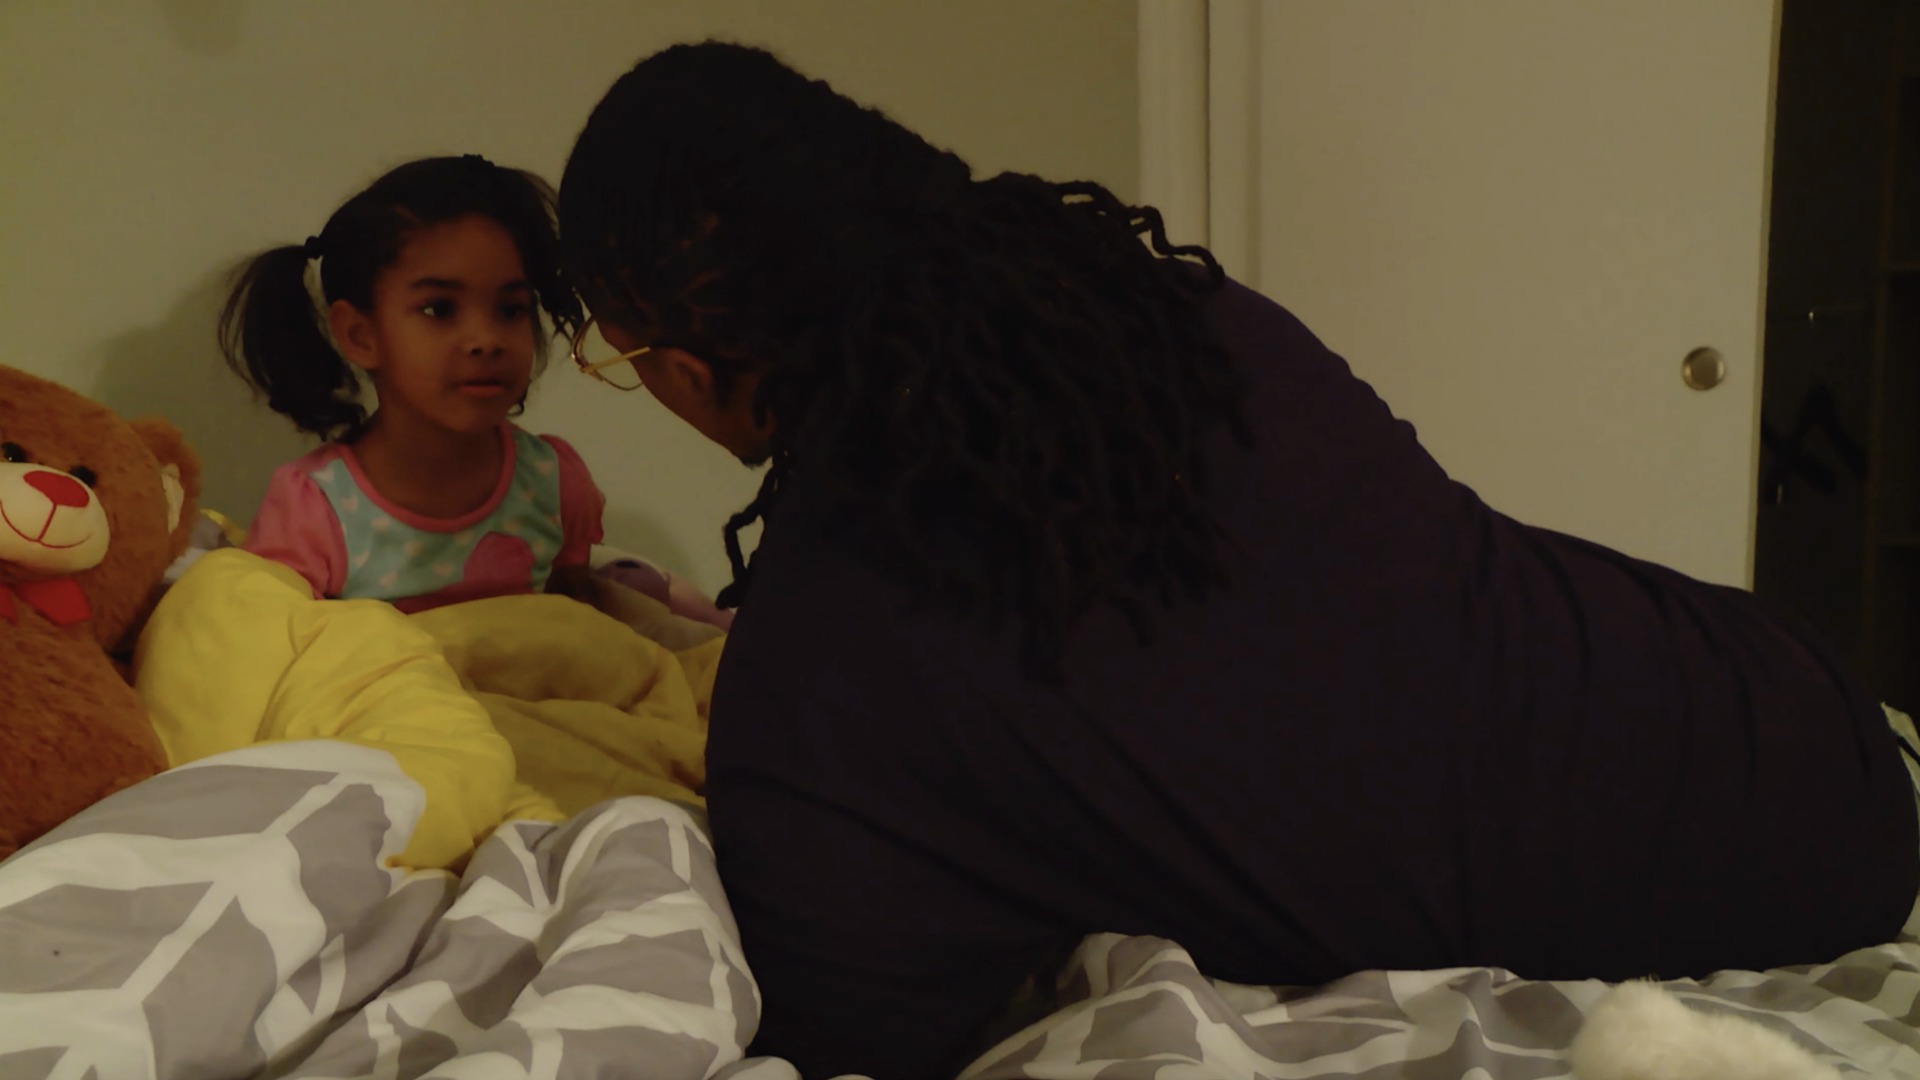 Watch Shavel's Daughter Begs Quaylon to Stay | Love After Lockup Video Extras